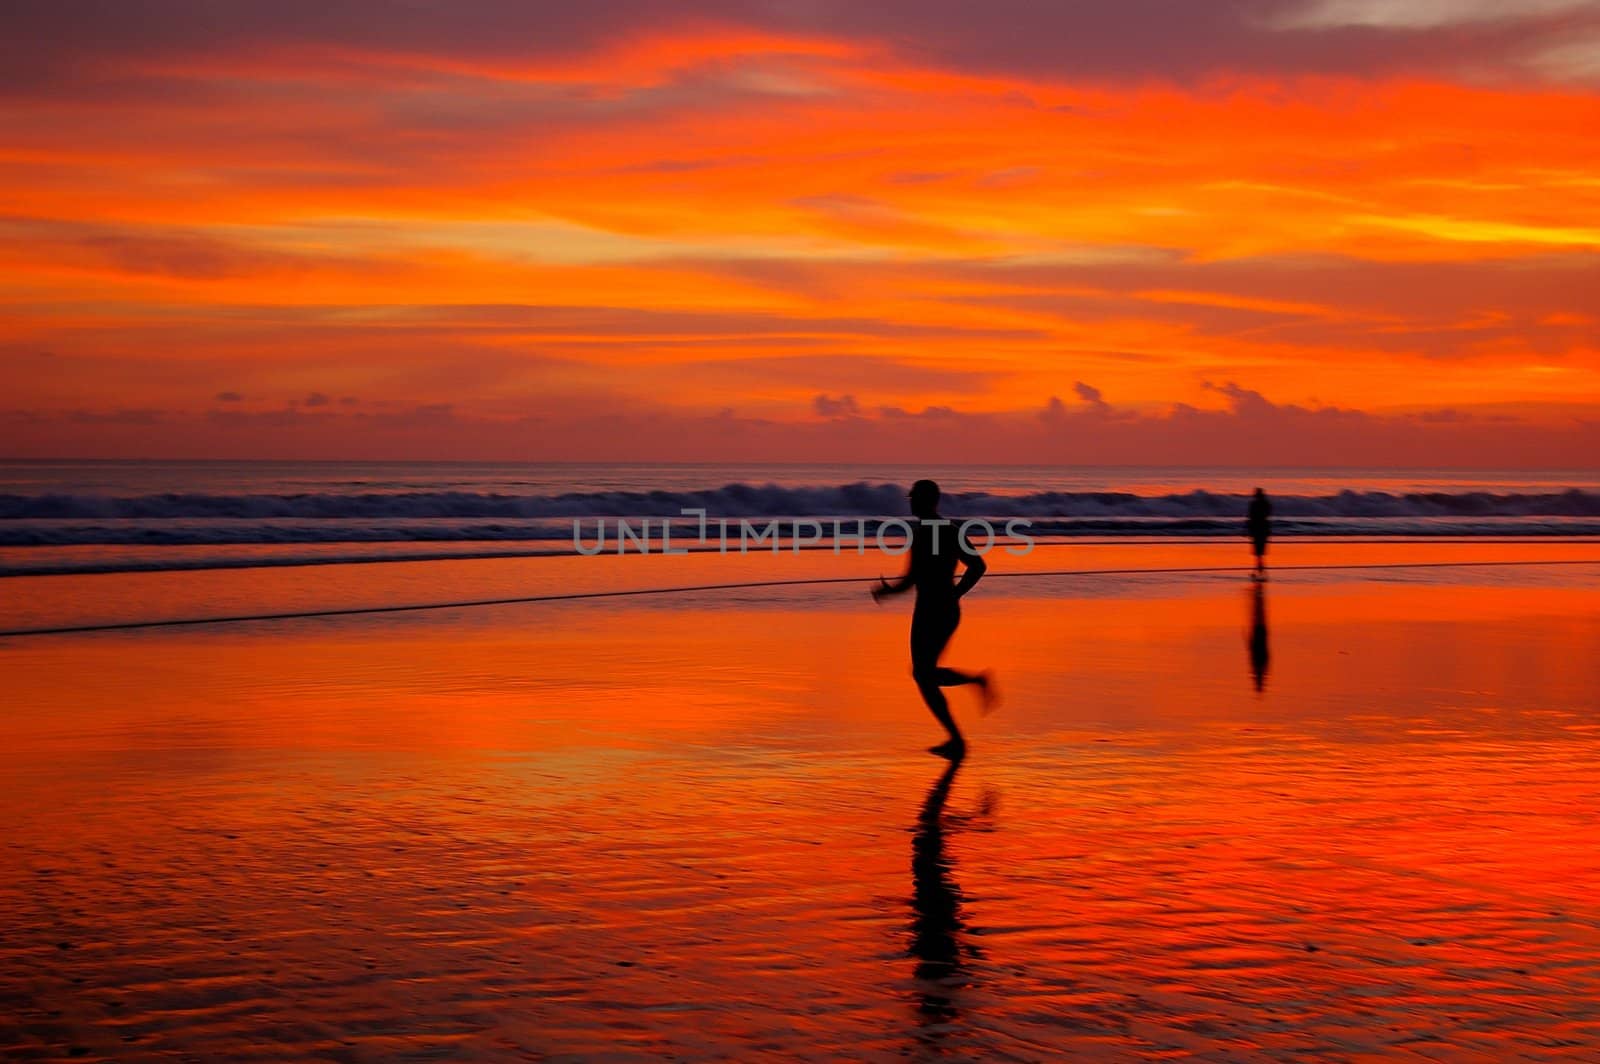 Jogging at sunset, on Double Six beach, Bali, Indonesia.